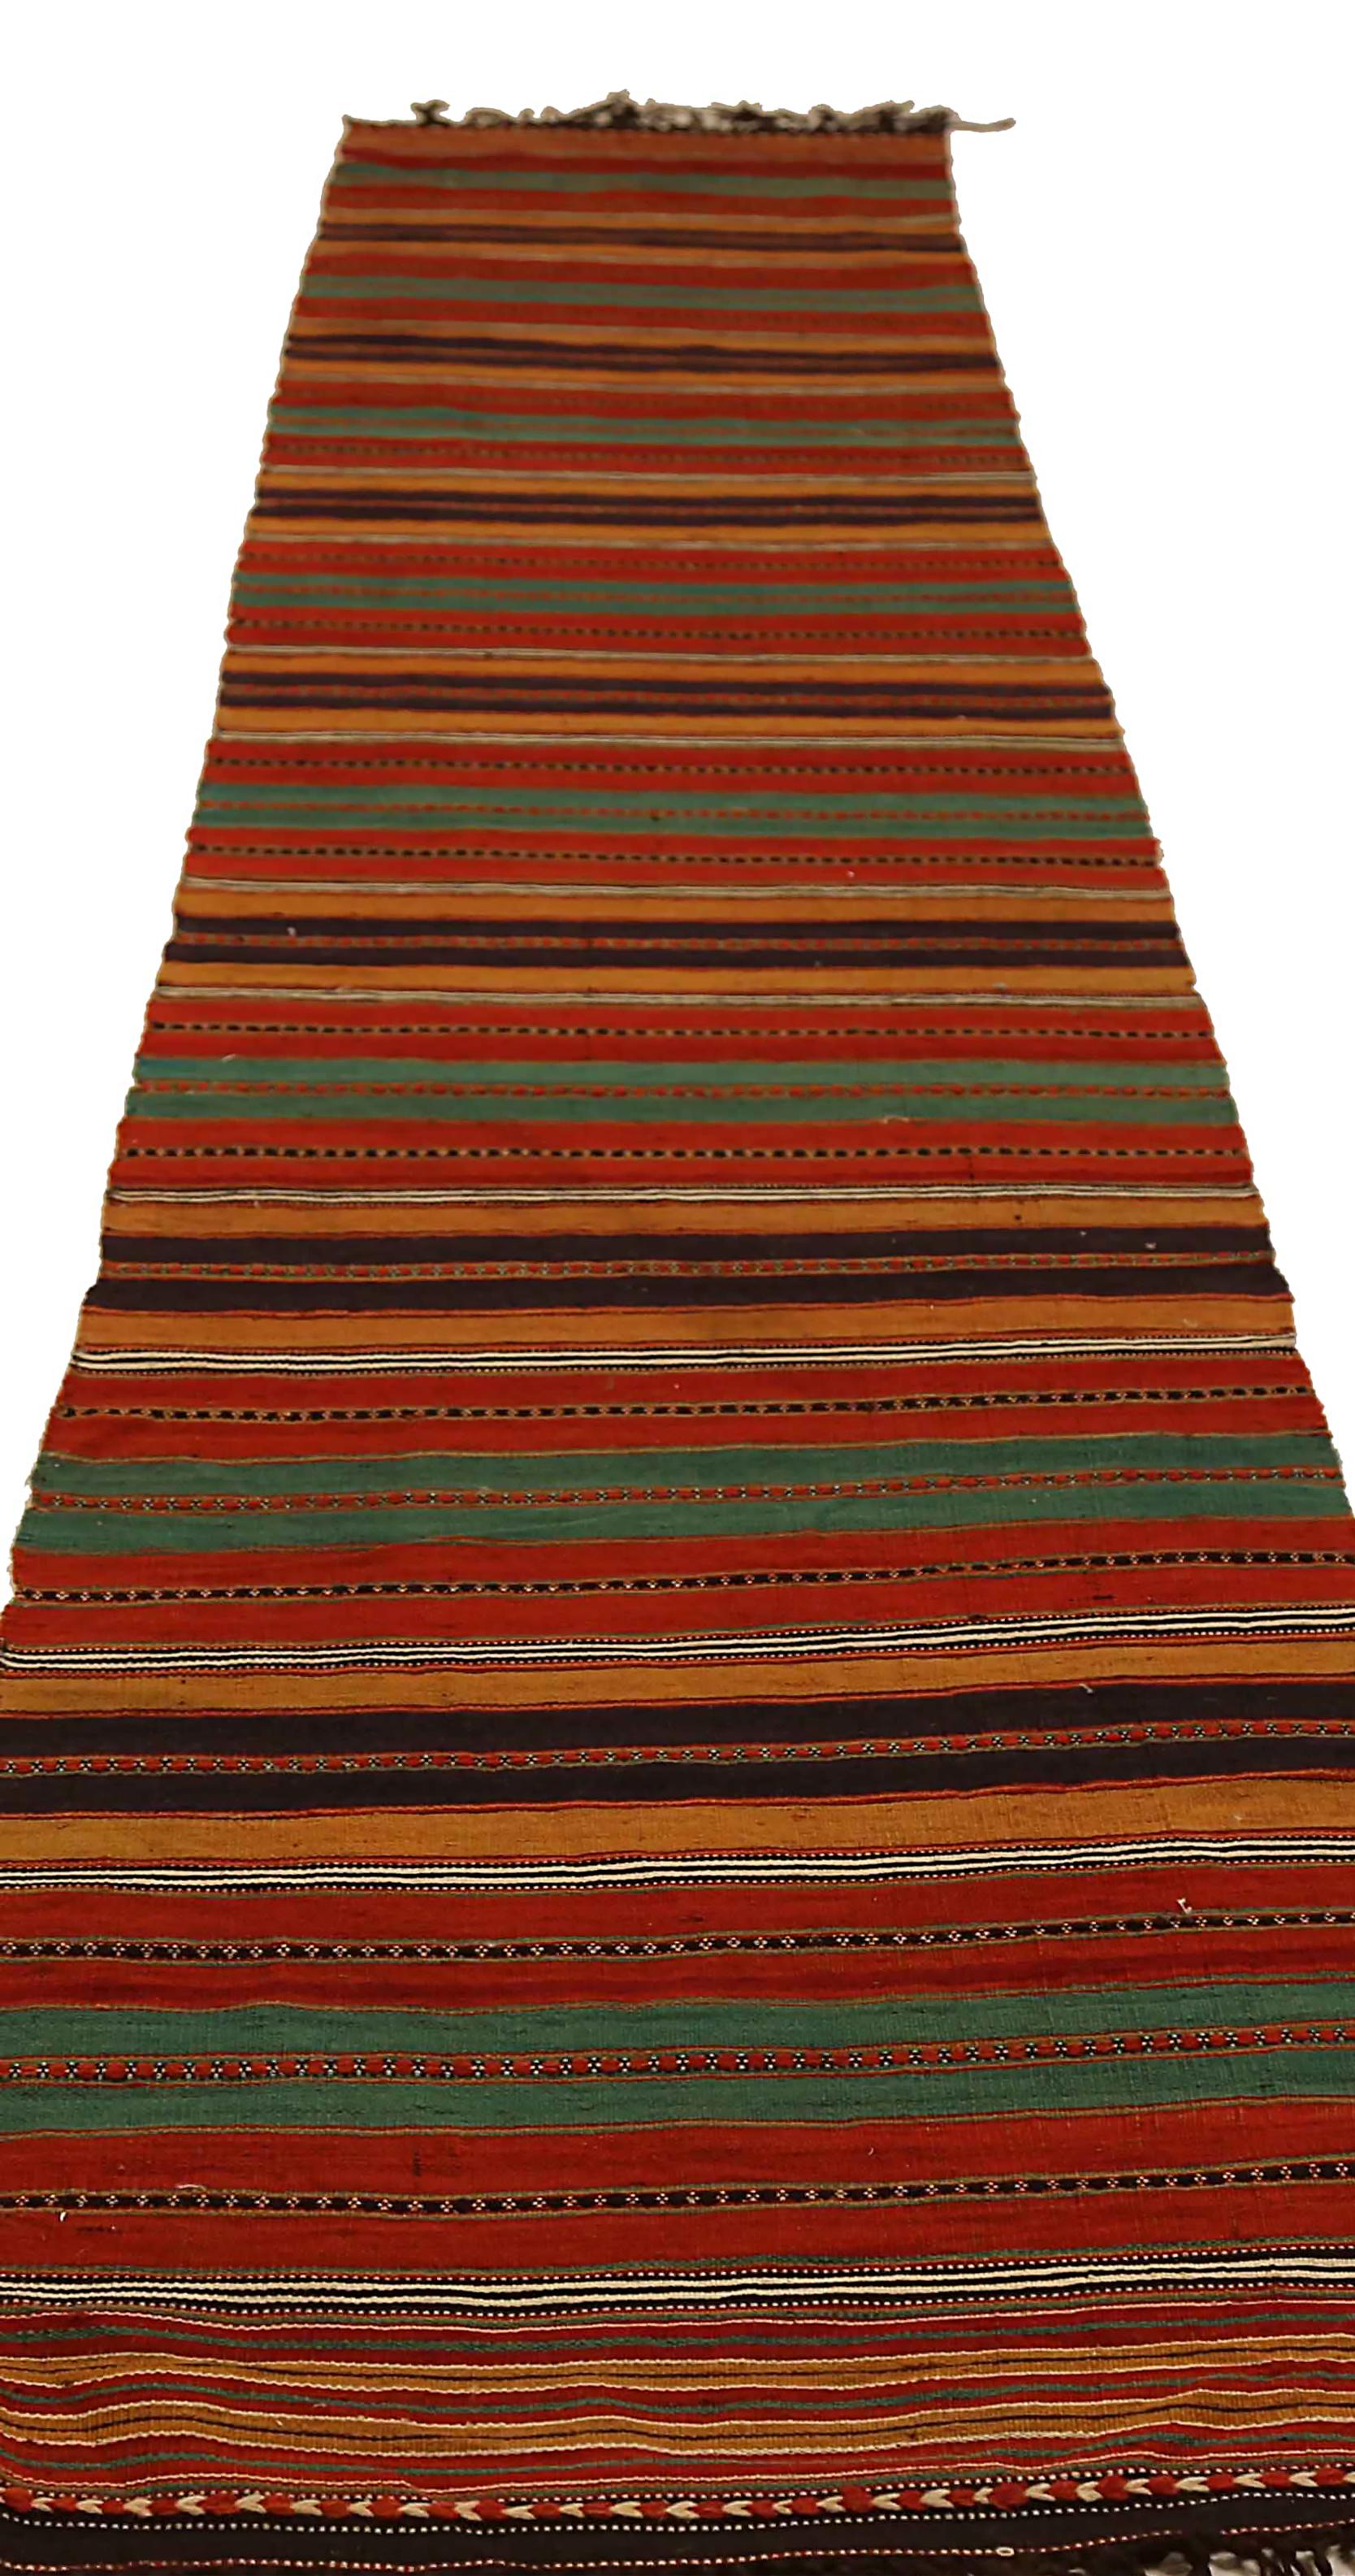 Antique handmade Persian runner rug from high quality sheep’s wool and colored with eco-friendly vegetable dyes that are proven safe for humans and pets alike. It’s a Classic Kilim design showcasing colored stripes. It’s a lovely piece that should